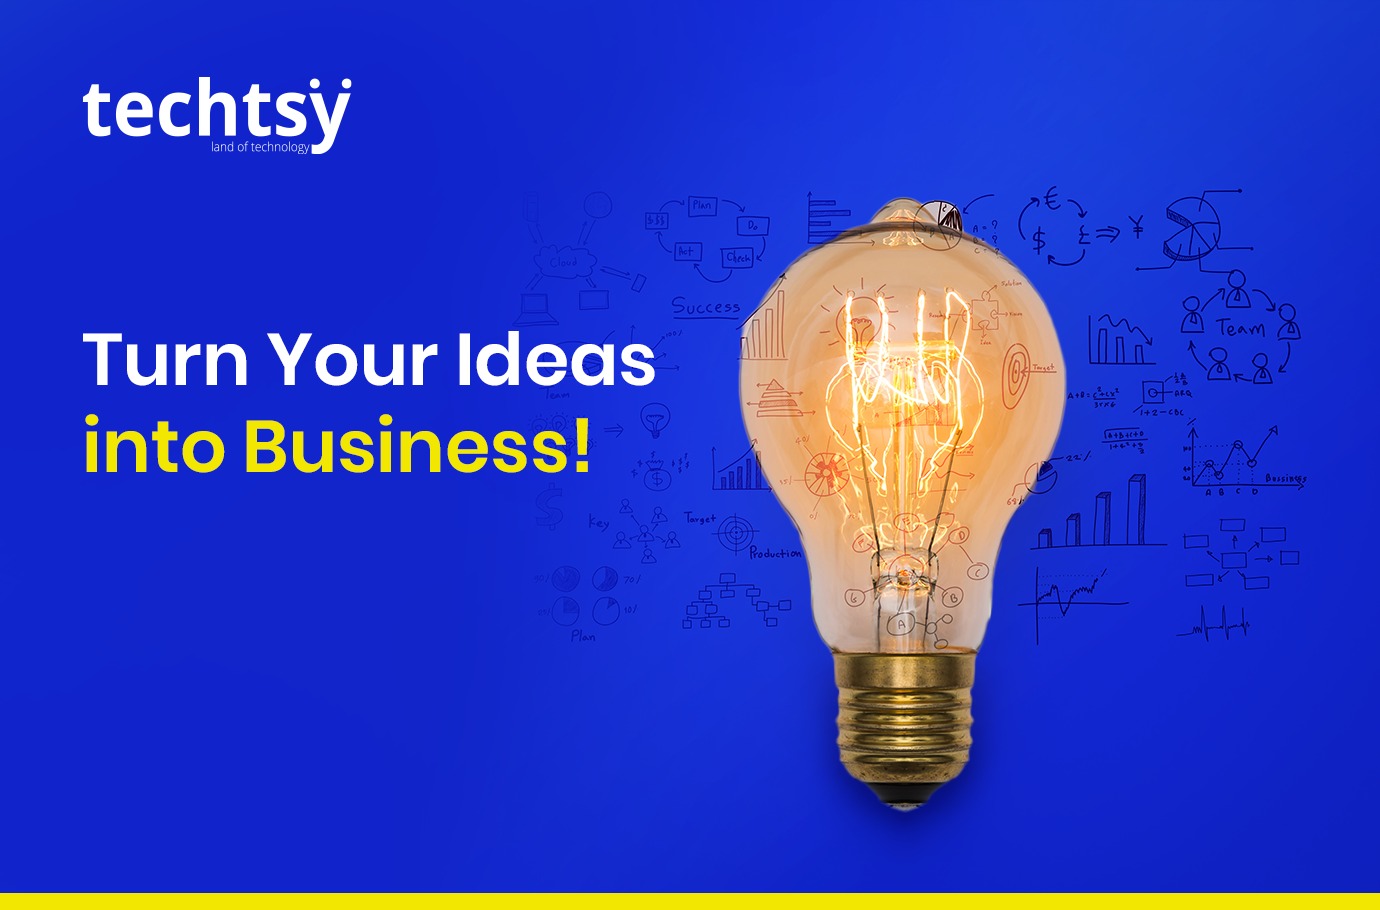 Turn your ideas into business